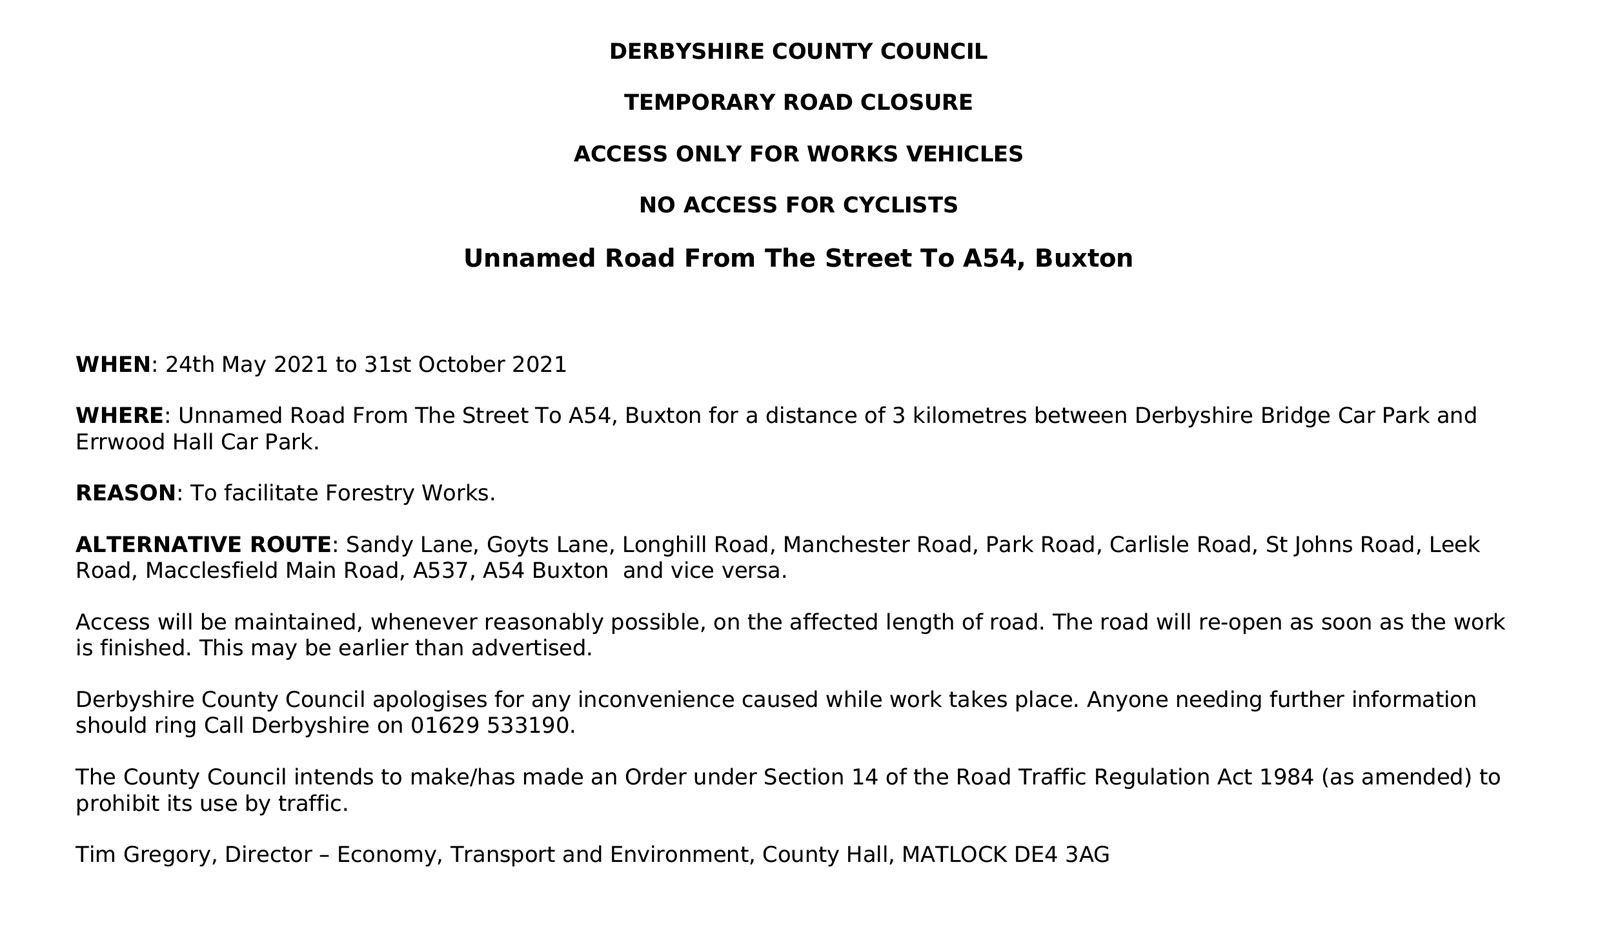 The road closure order published by Derbyshire County Council.